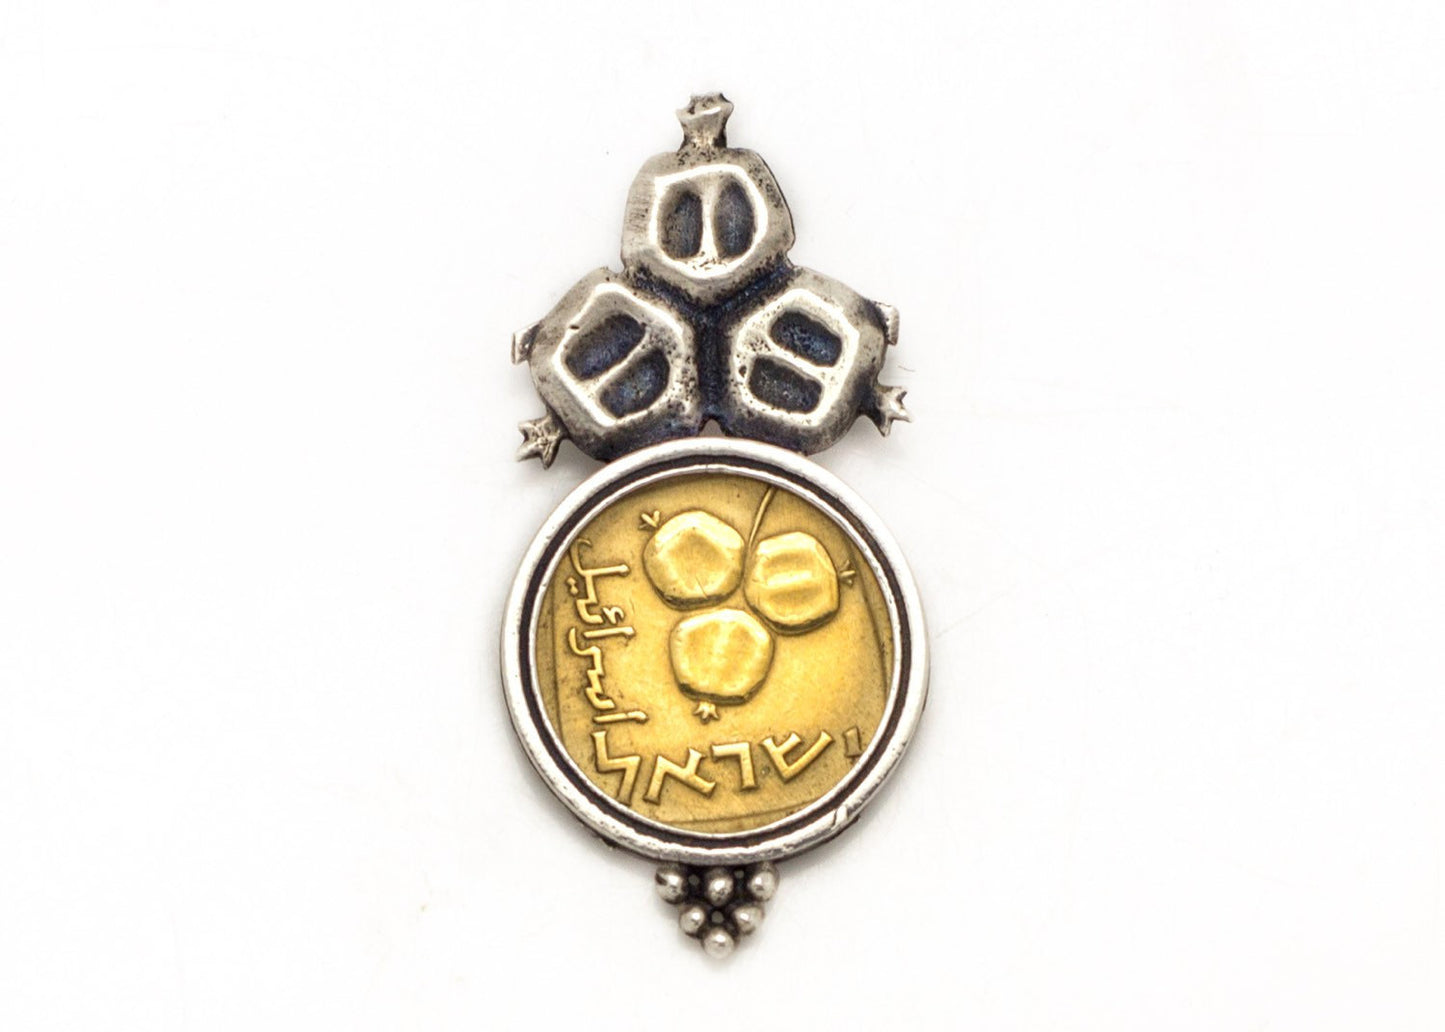 Israeli Old, Collector's Coin Necklace -  5 Agorot Israel Coin